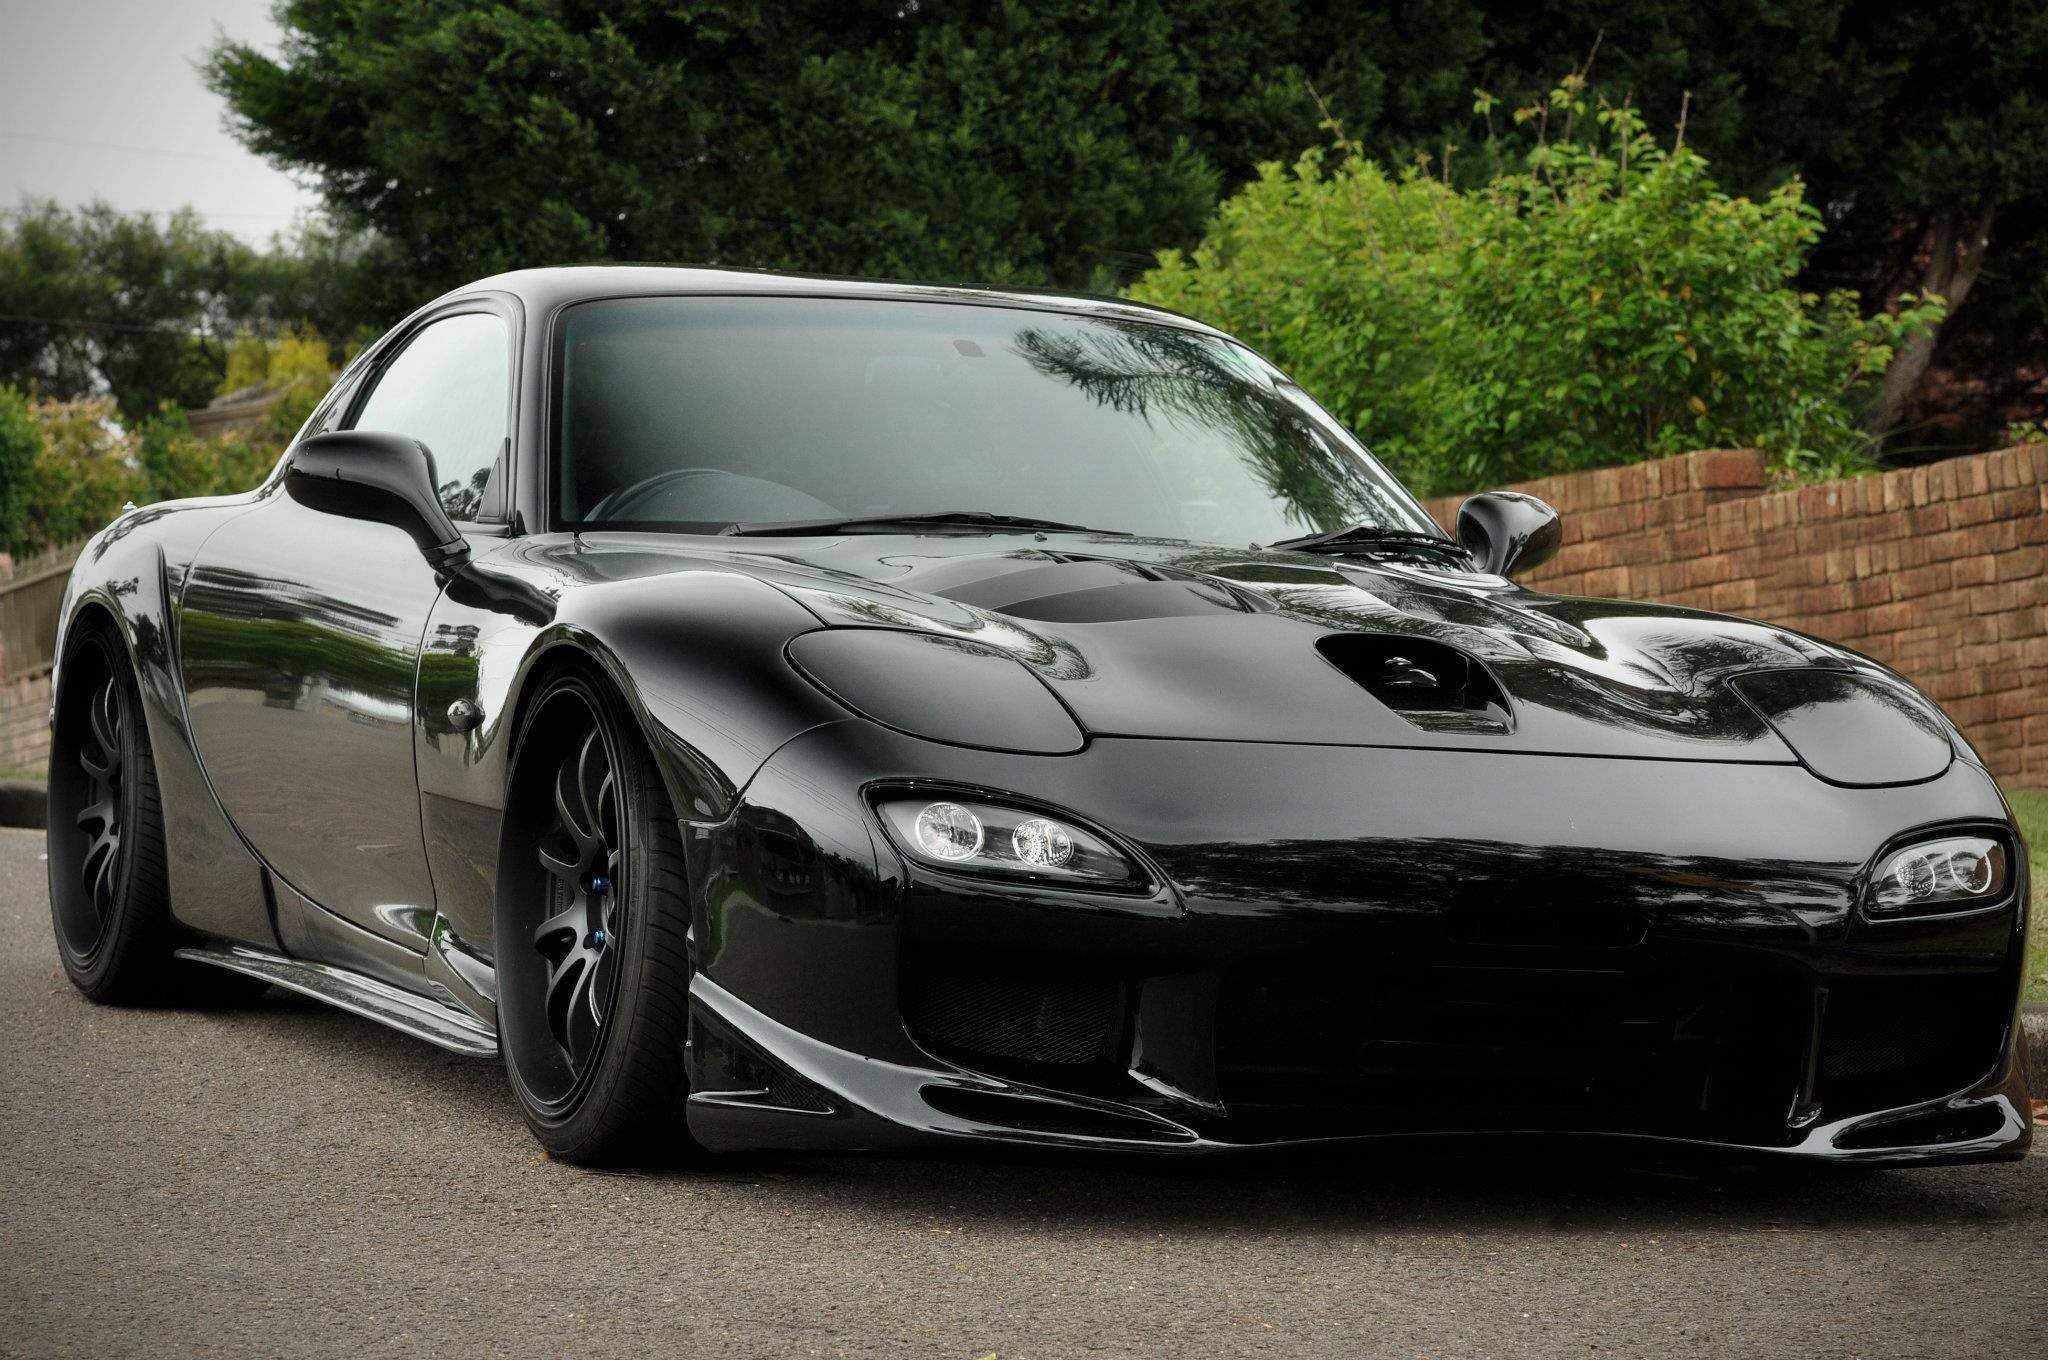 Car Mazda RX 7 Wallpapers HD / Desktop And Mobile Backgrounds.